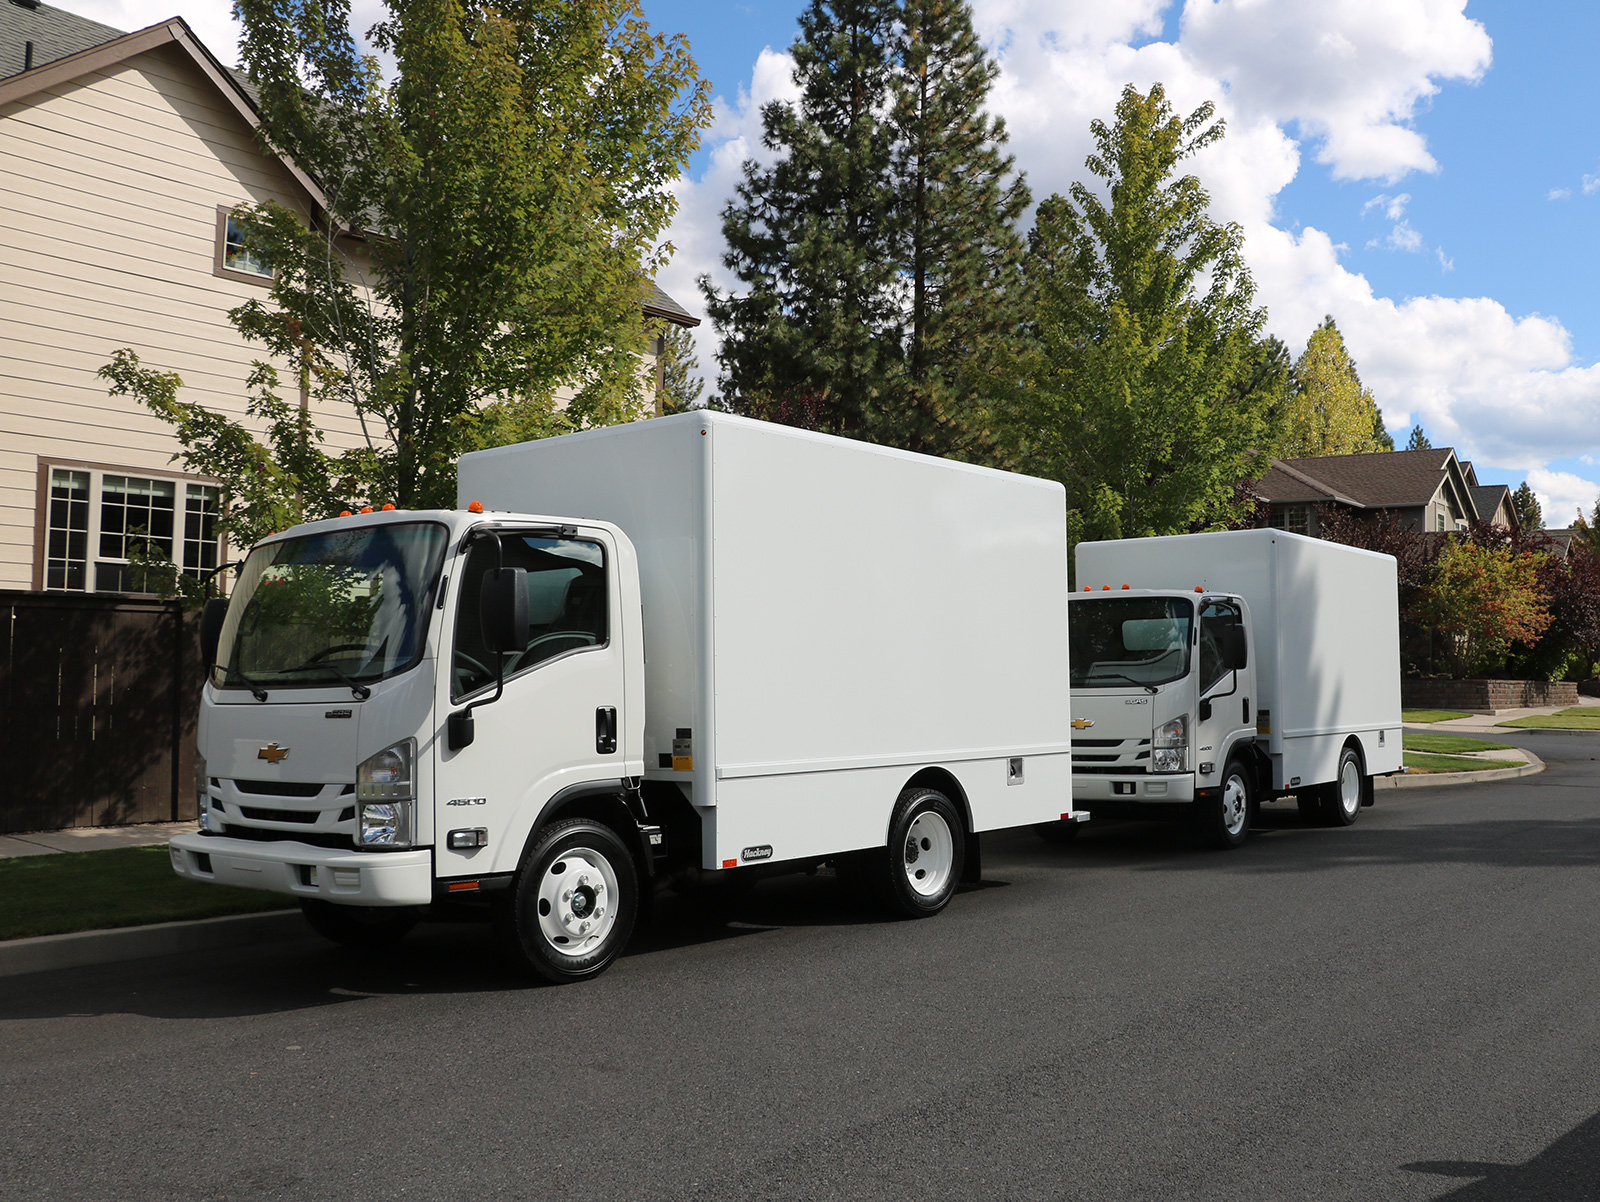 Finance & Lease Fedex Delivery Trucks, Step Vans and Vehicles